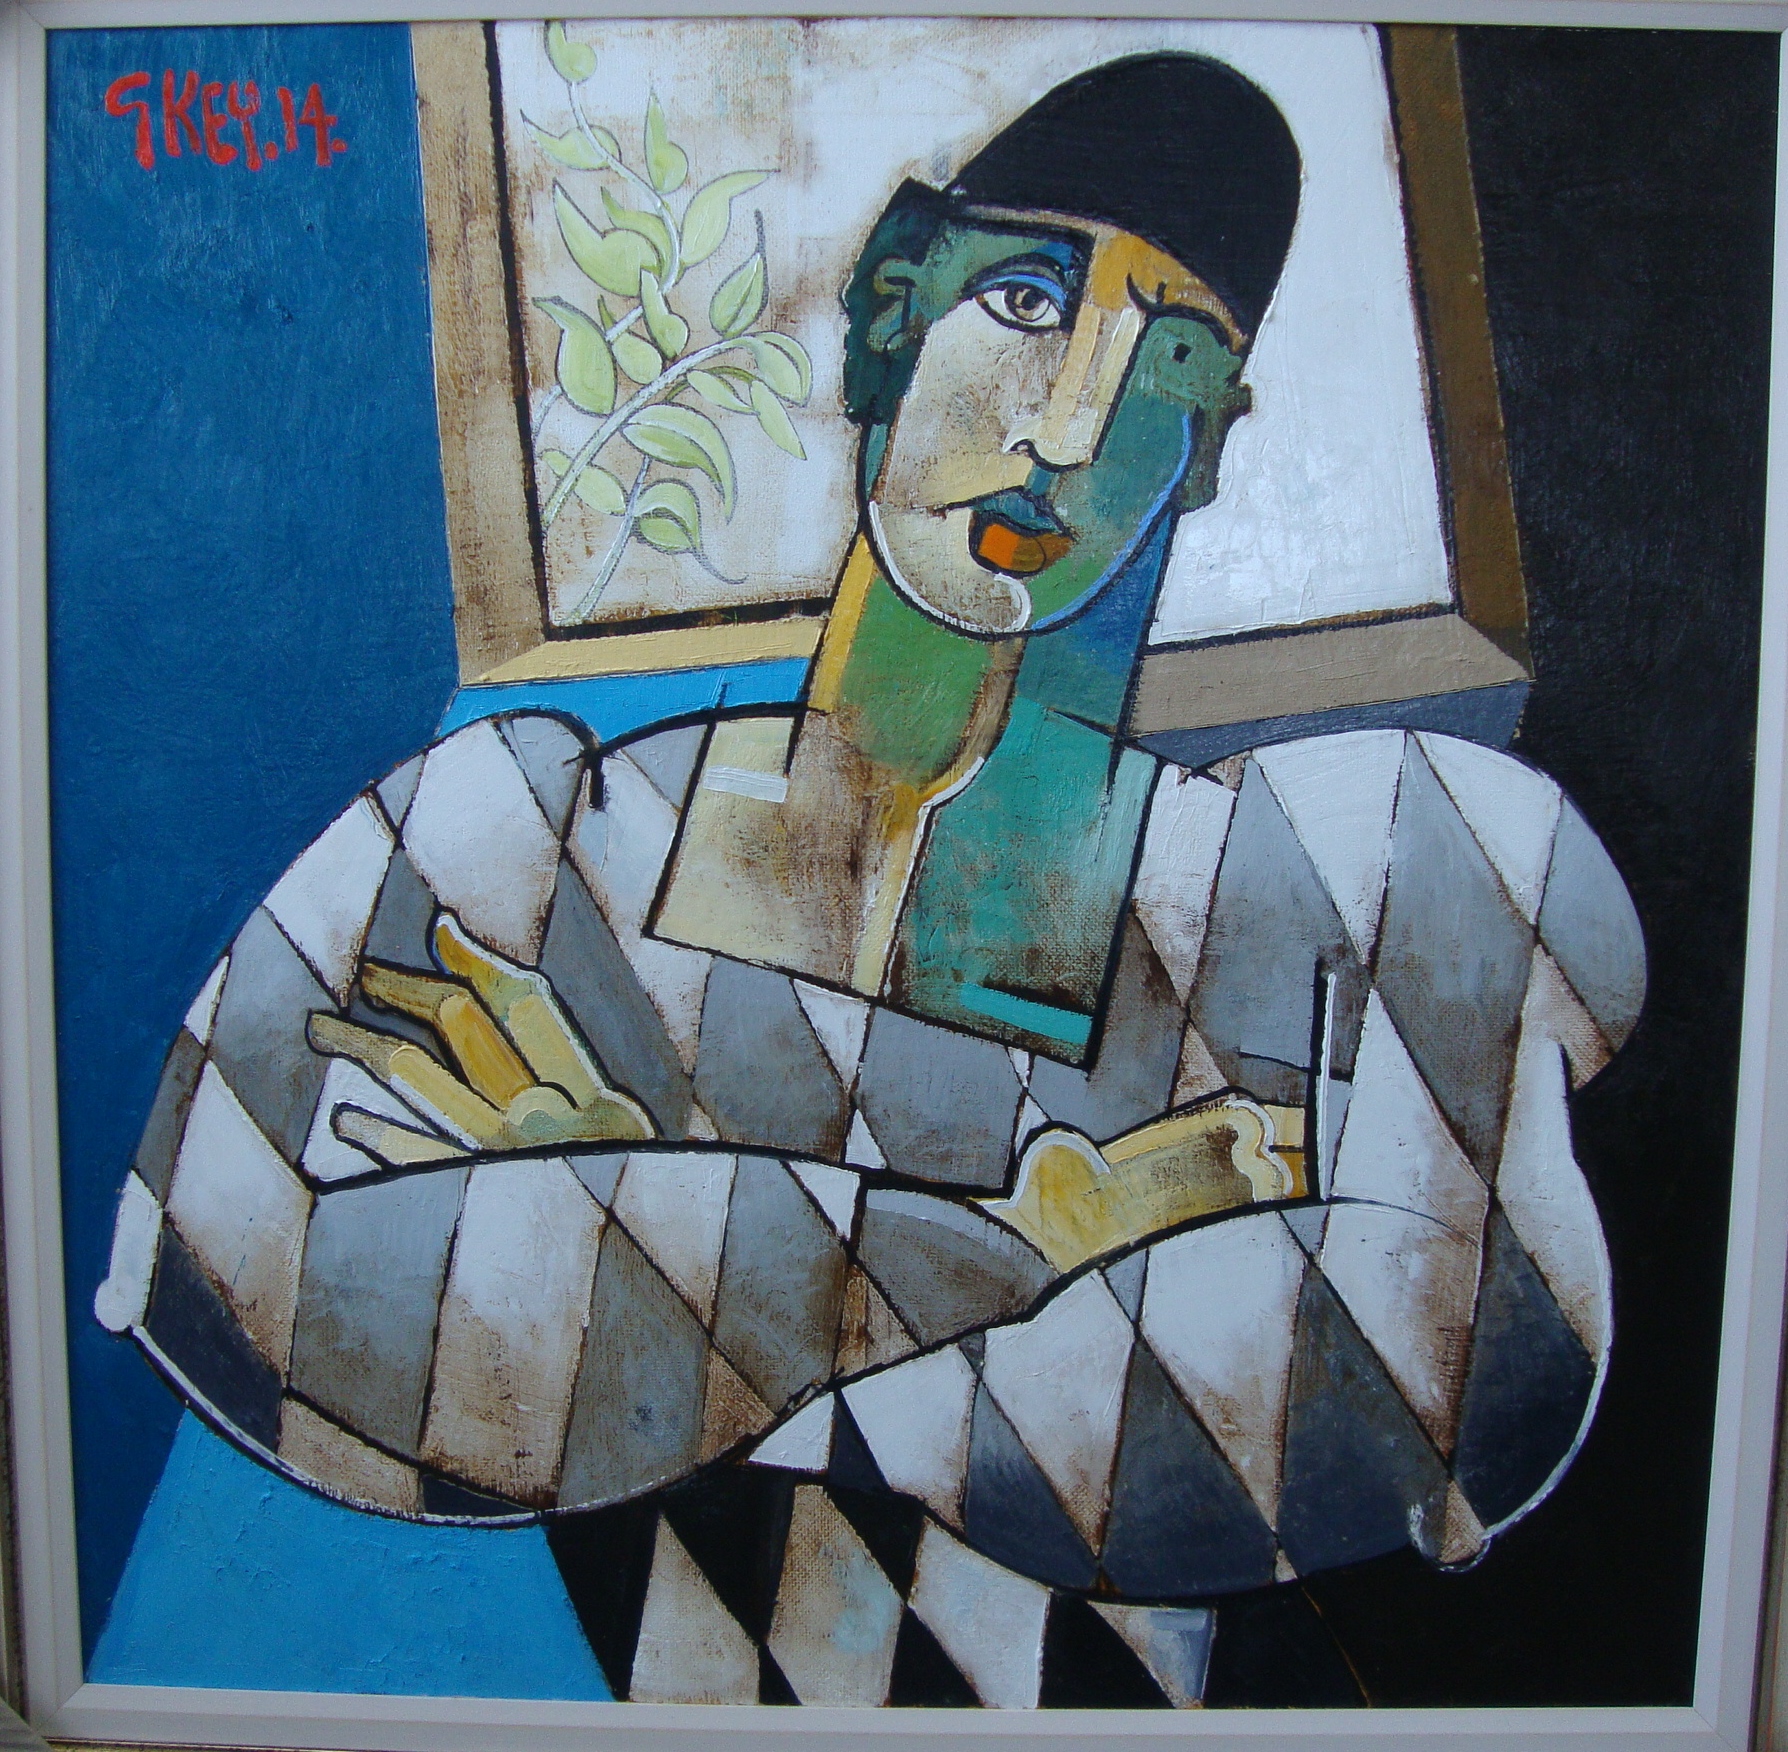 Geoffrey Key - Harlequin With Arms Folded, oil on canvas. 36" x 36". Signed on front of painting "